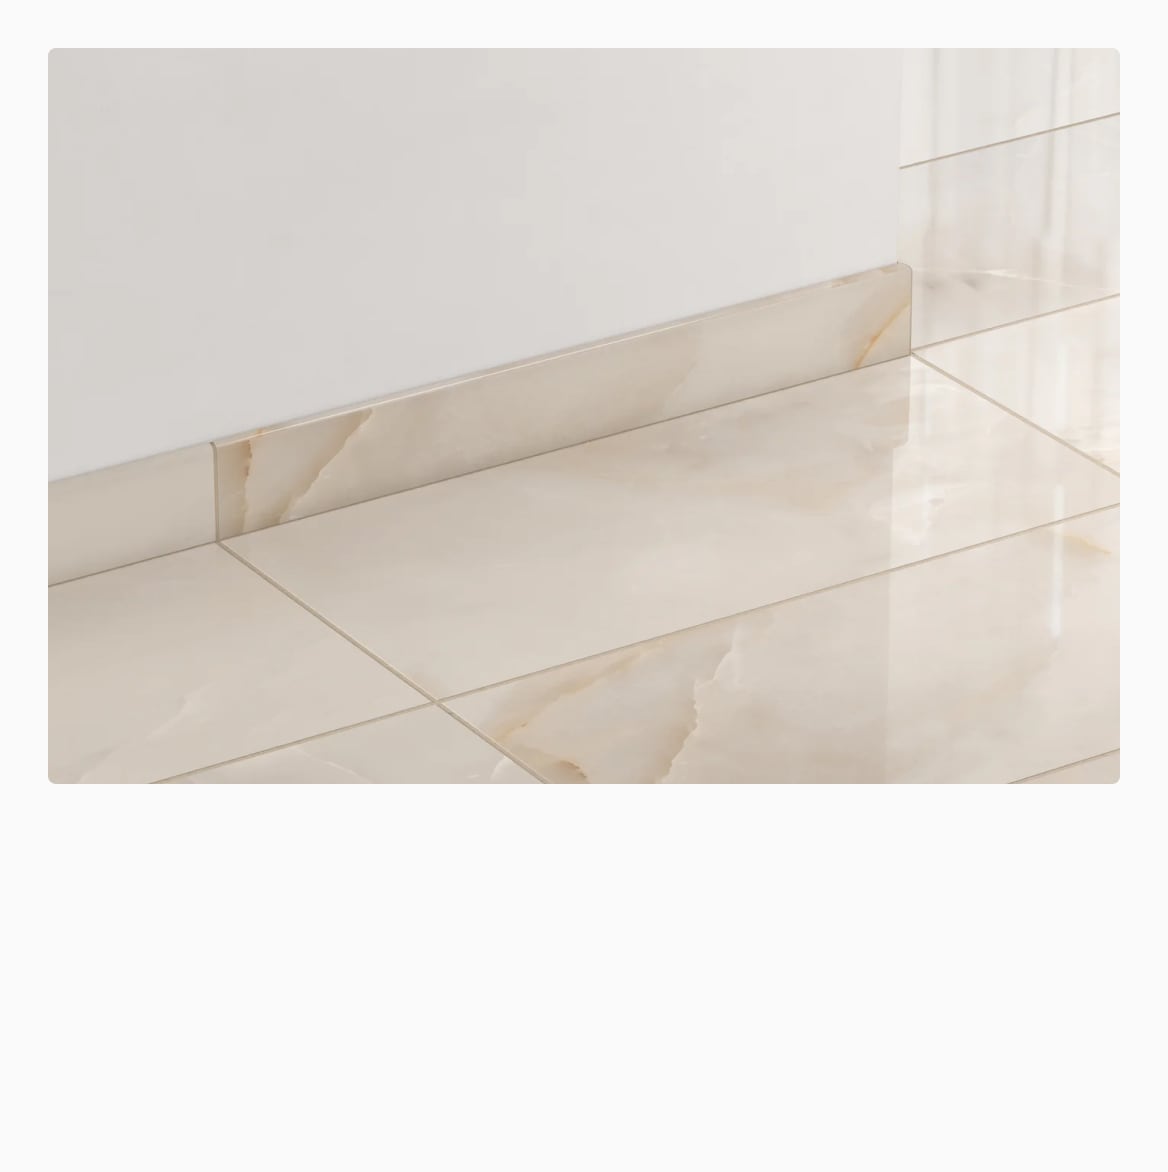 Elegant bullnose trim tiles perfectly match the floor tiles, framing the space with a polished, cohesive finish.